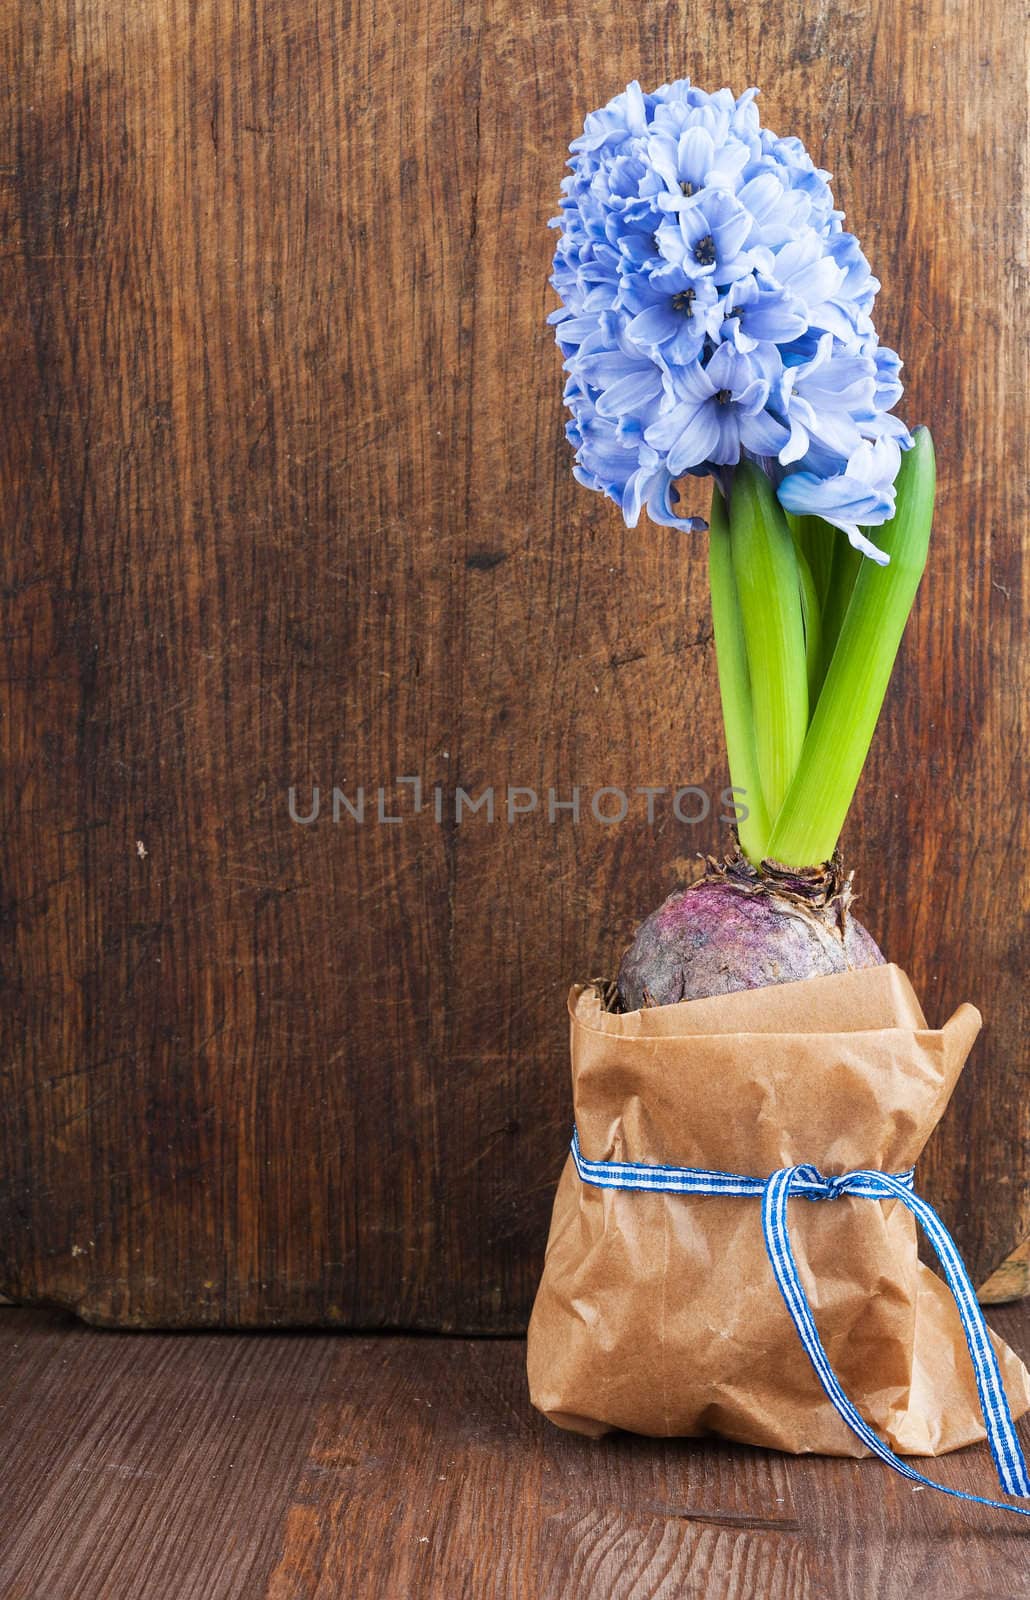 Hyacinth against the old wooden surface